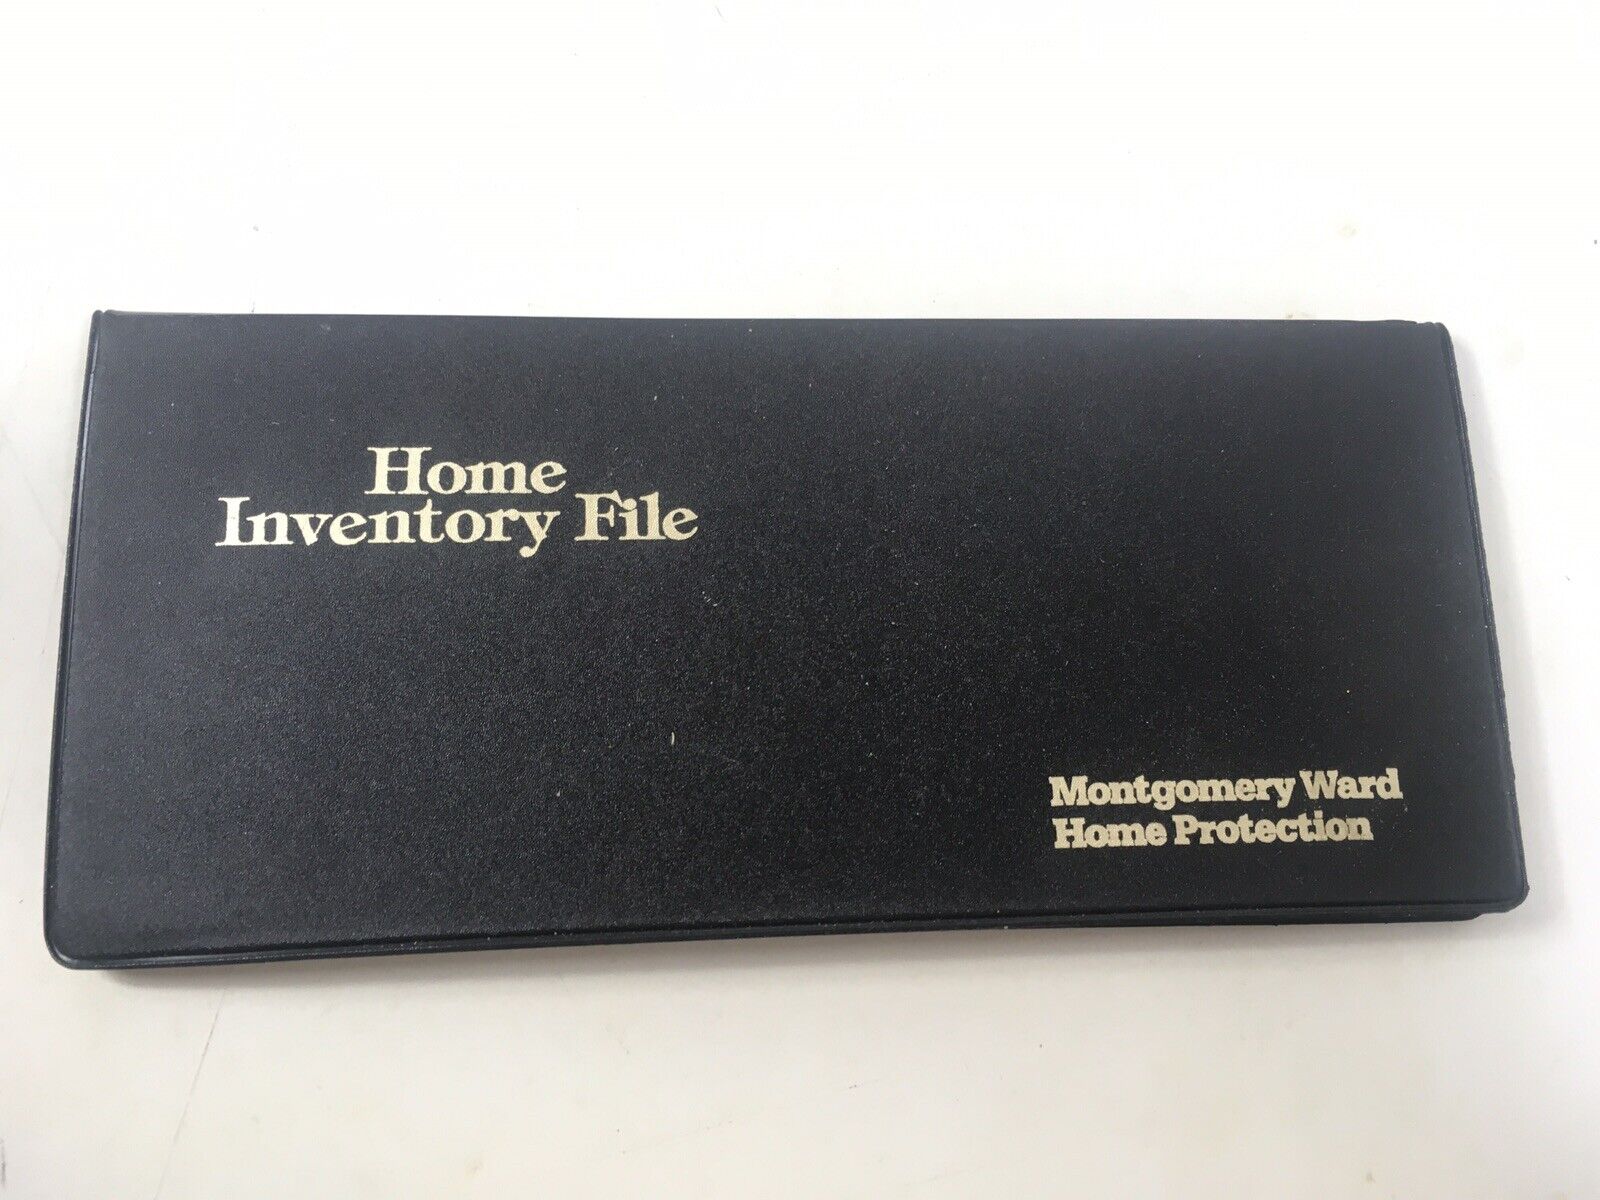 Vintage Montgomery Ward Home Protection Home Inventory File